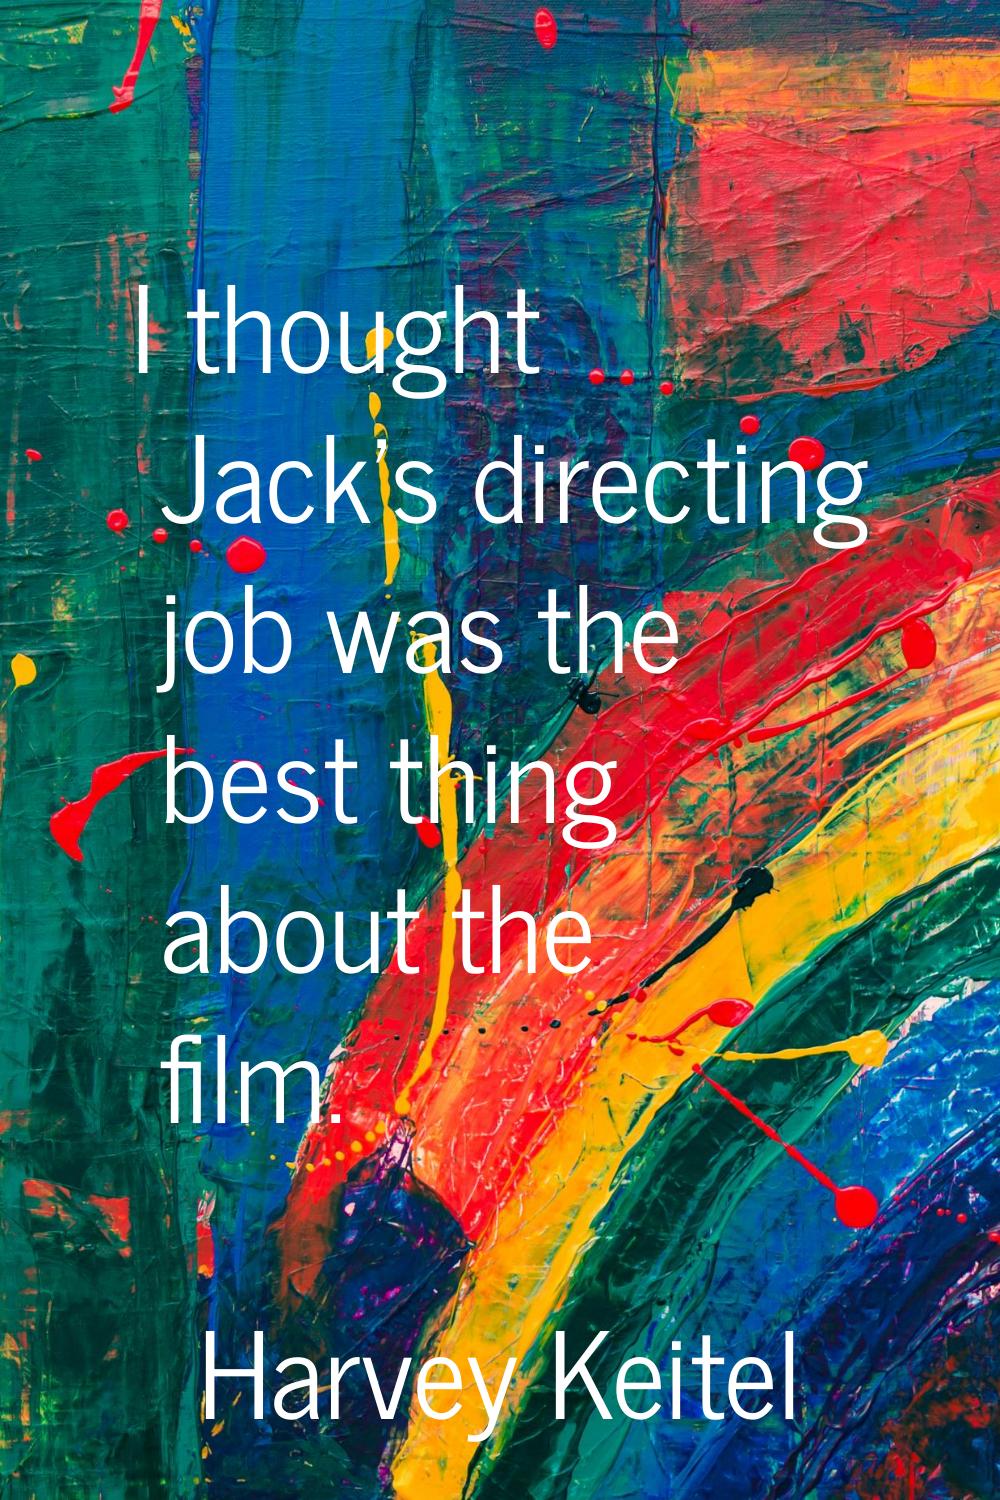 I thought Jack's directing job was the best thing about the film.